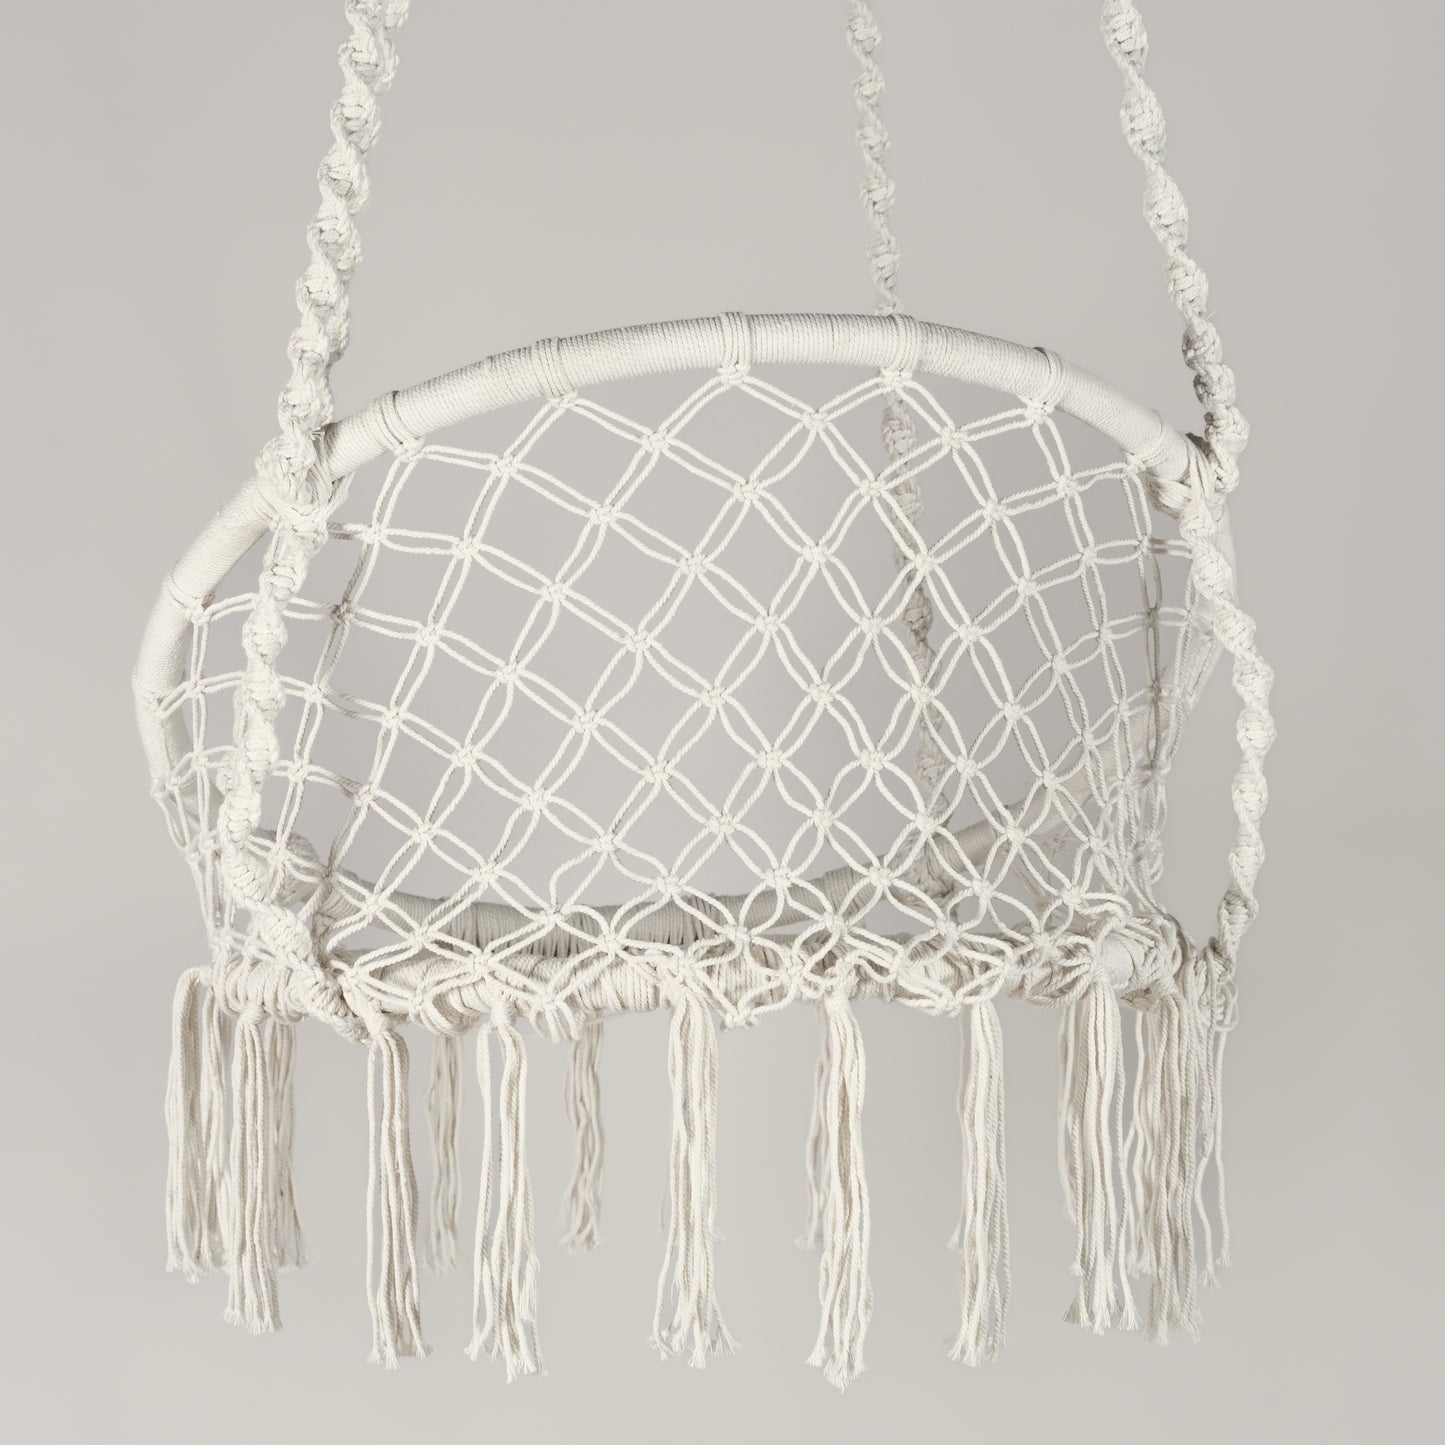 Handmade cotton swing with braided seat